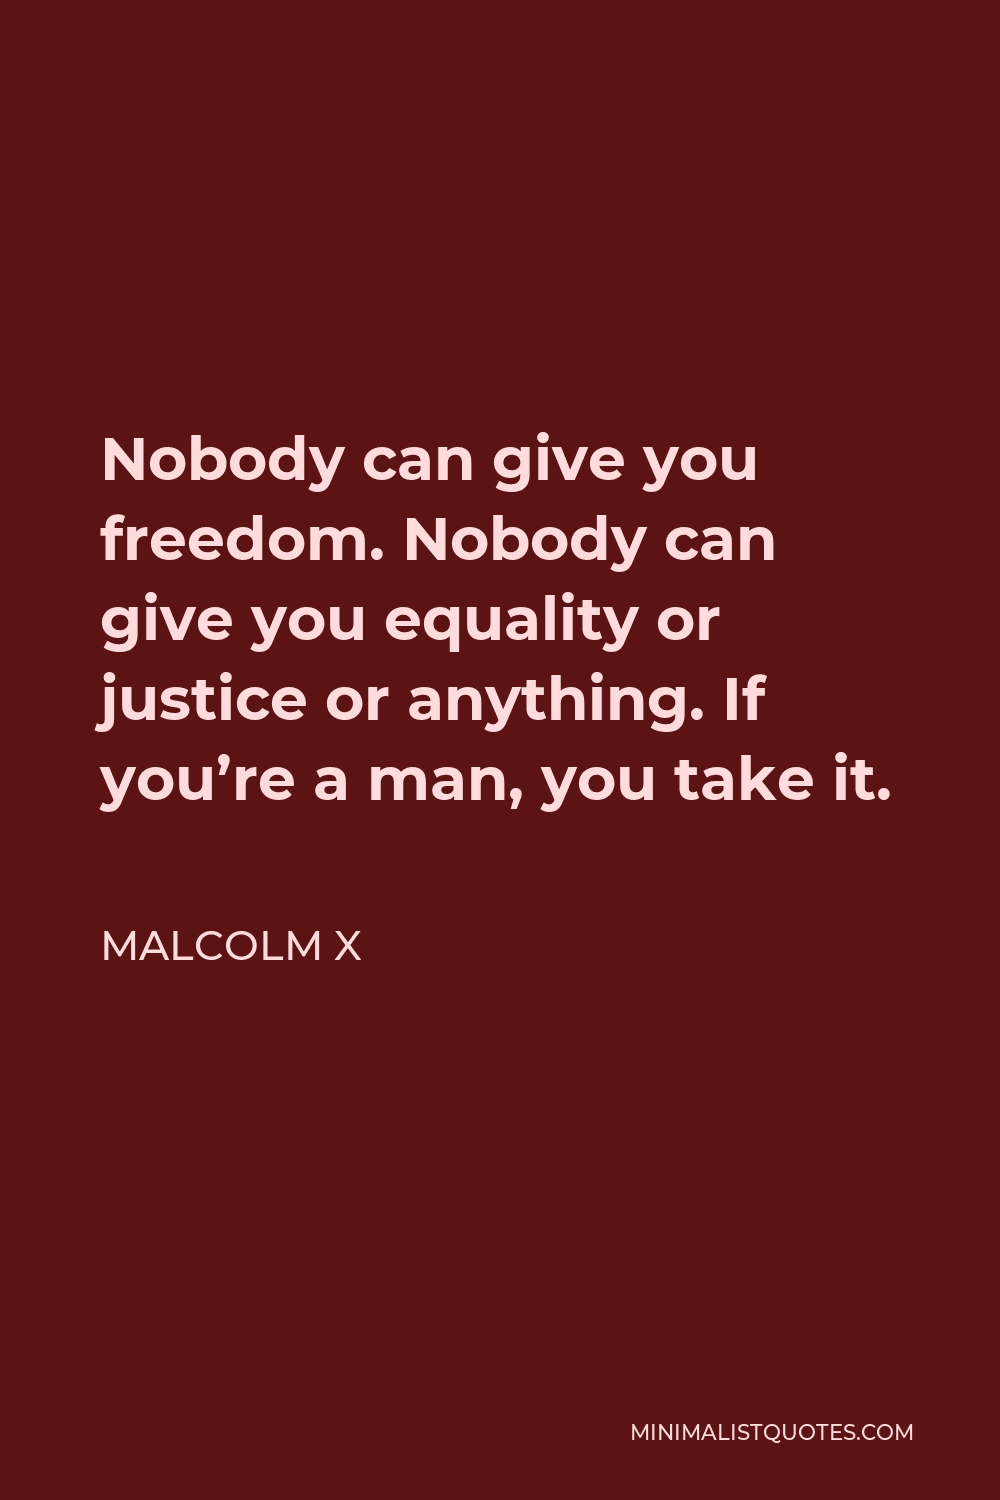 Malcolm X Quote - Nobody can give you freedom. Nobody can give you equality or justice or anything. If you’re a man, you take it.